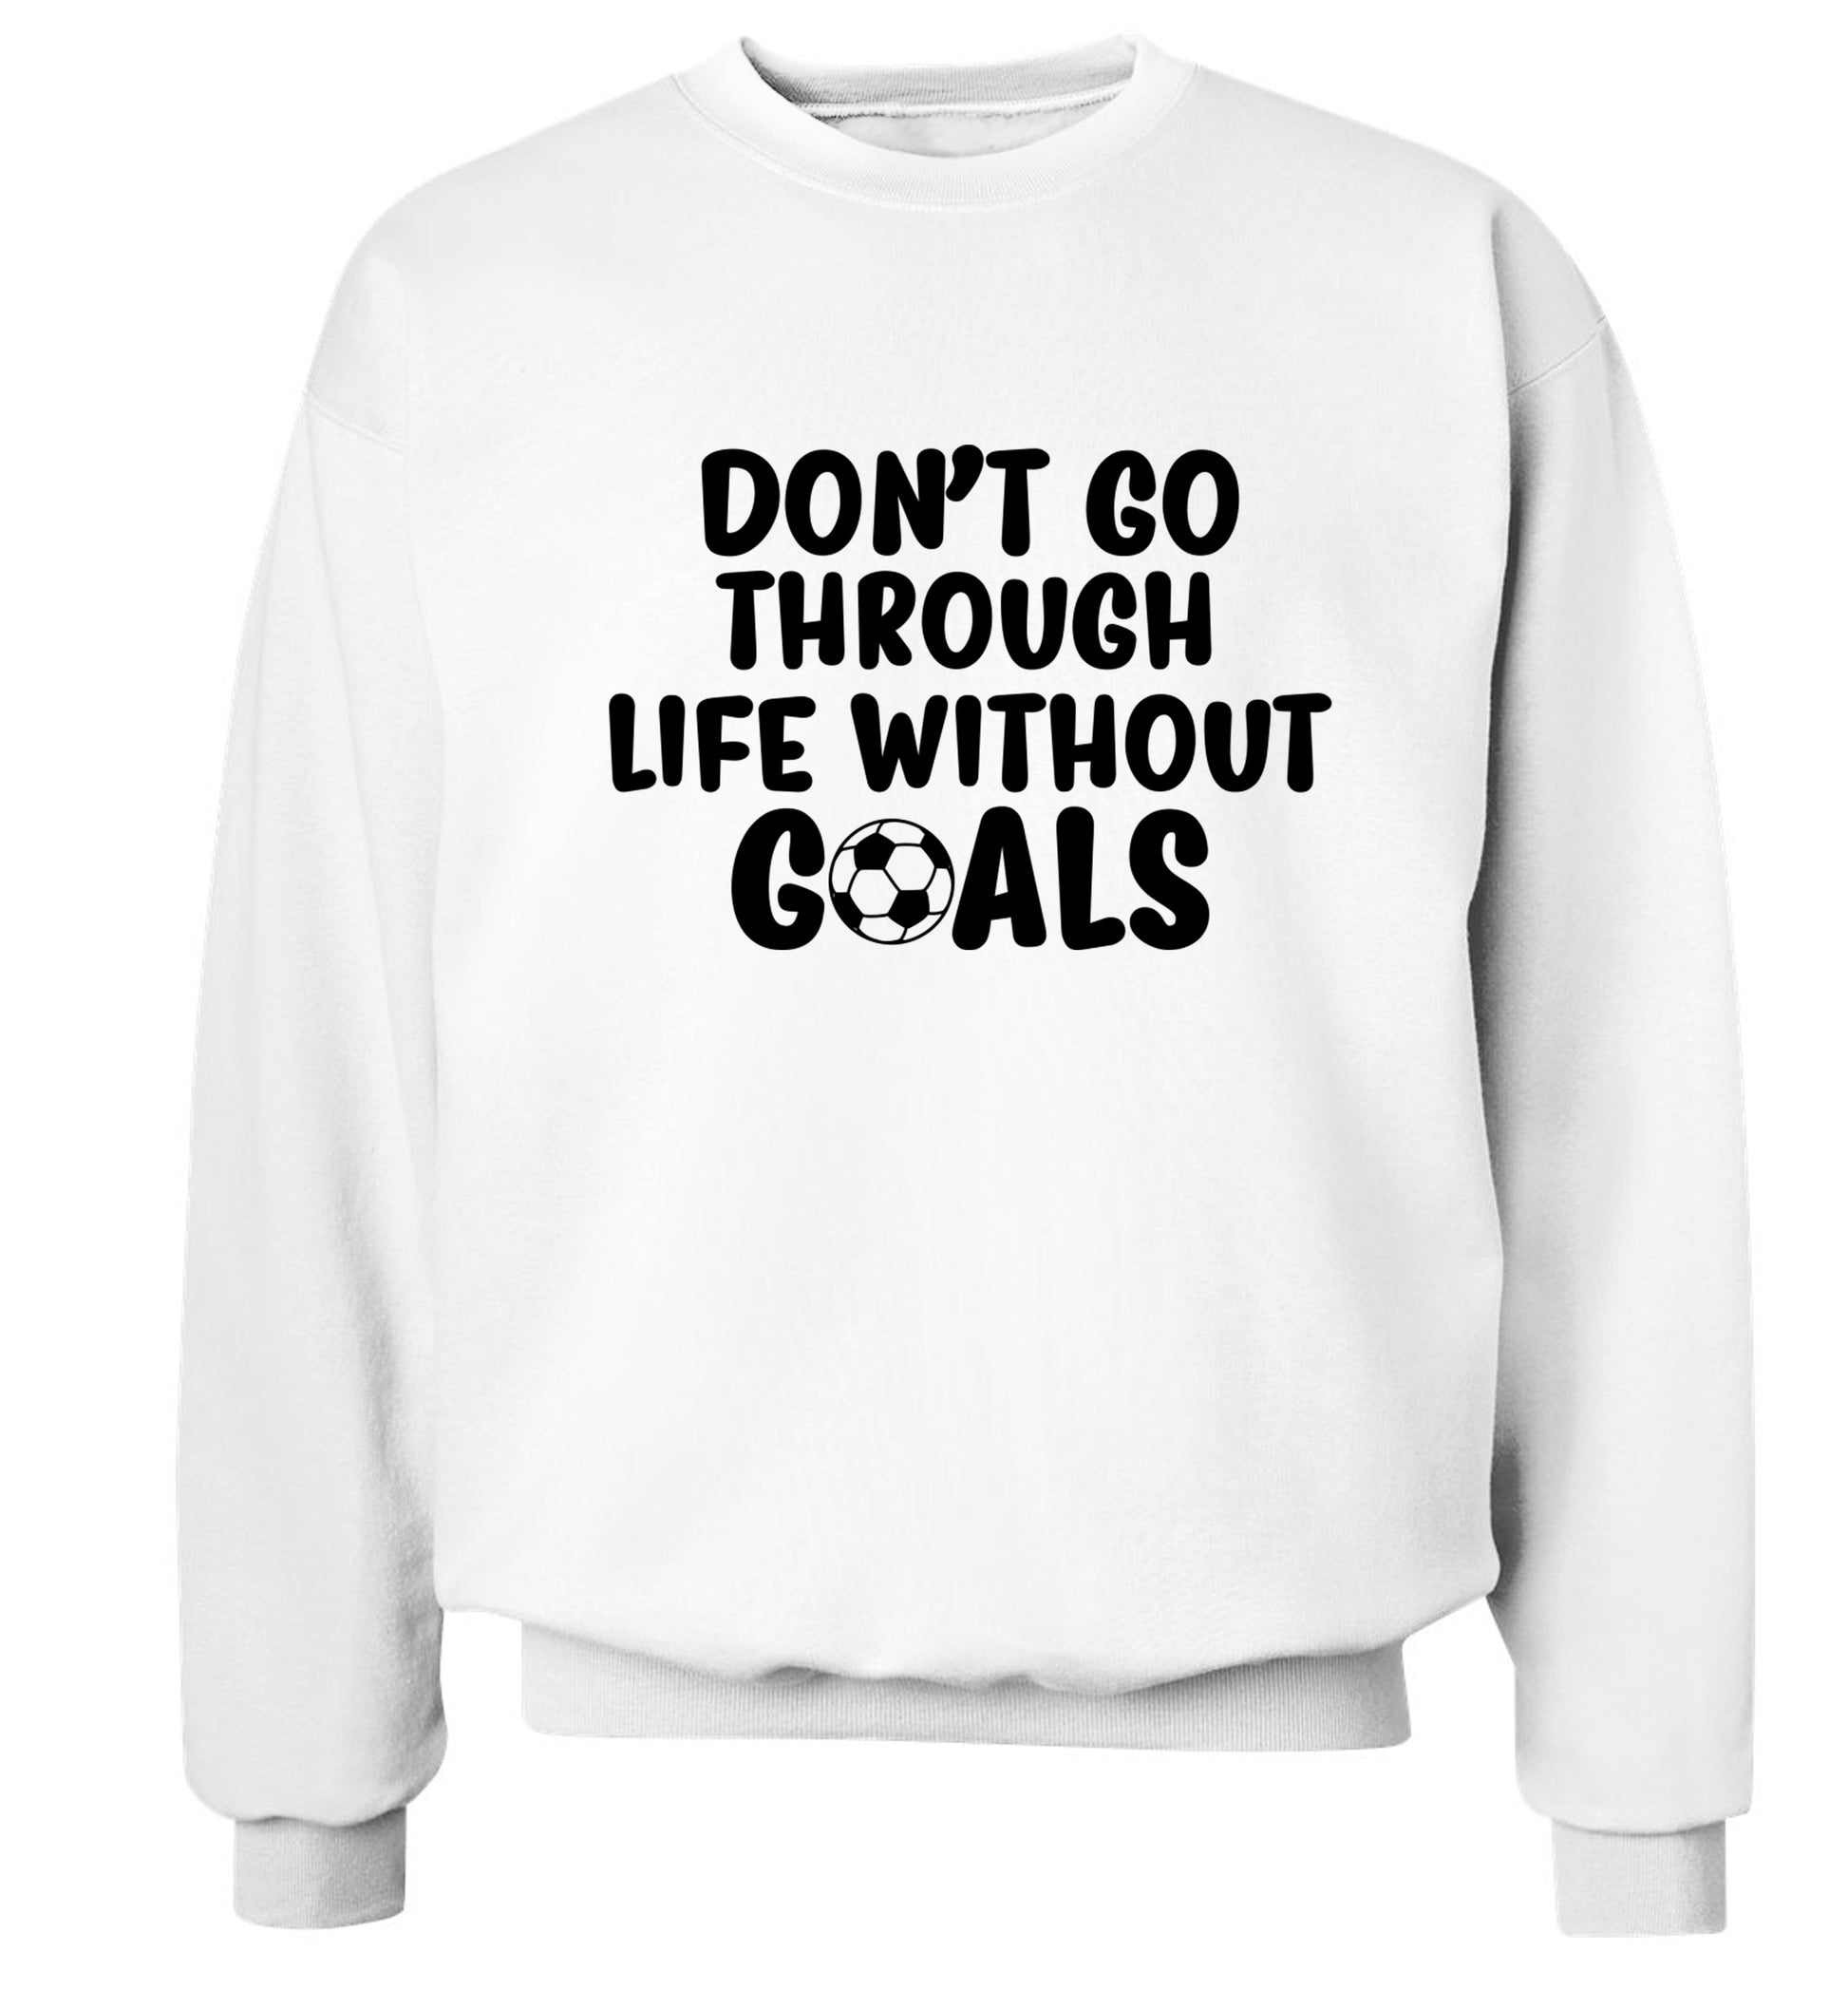 Don't go through life without goals Adult's unisexwhite Sweater 2XL